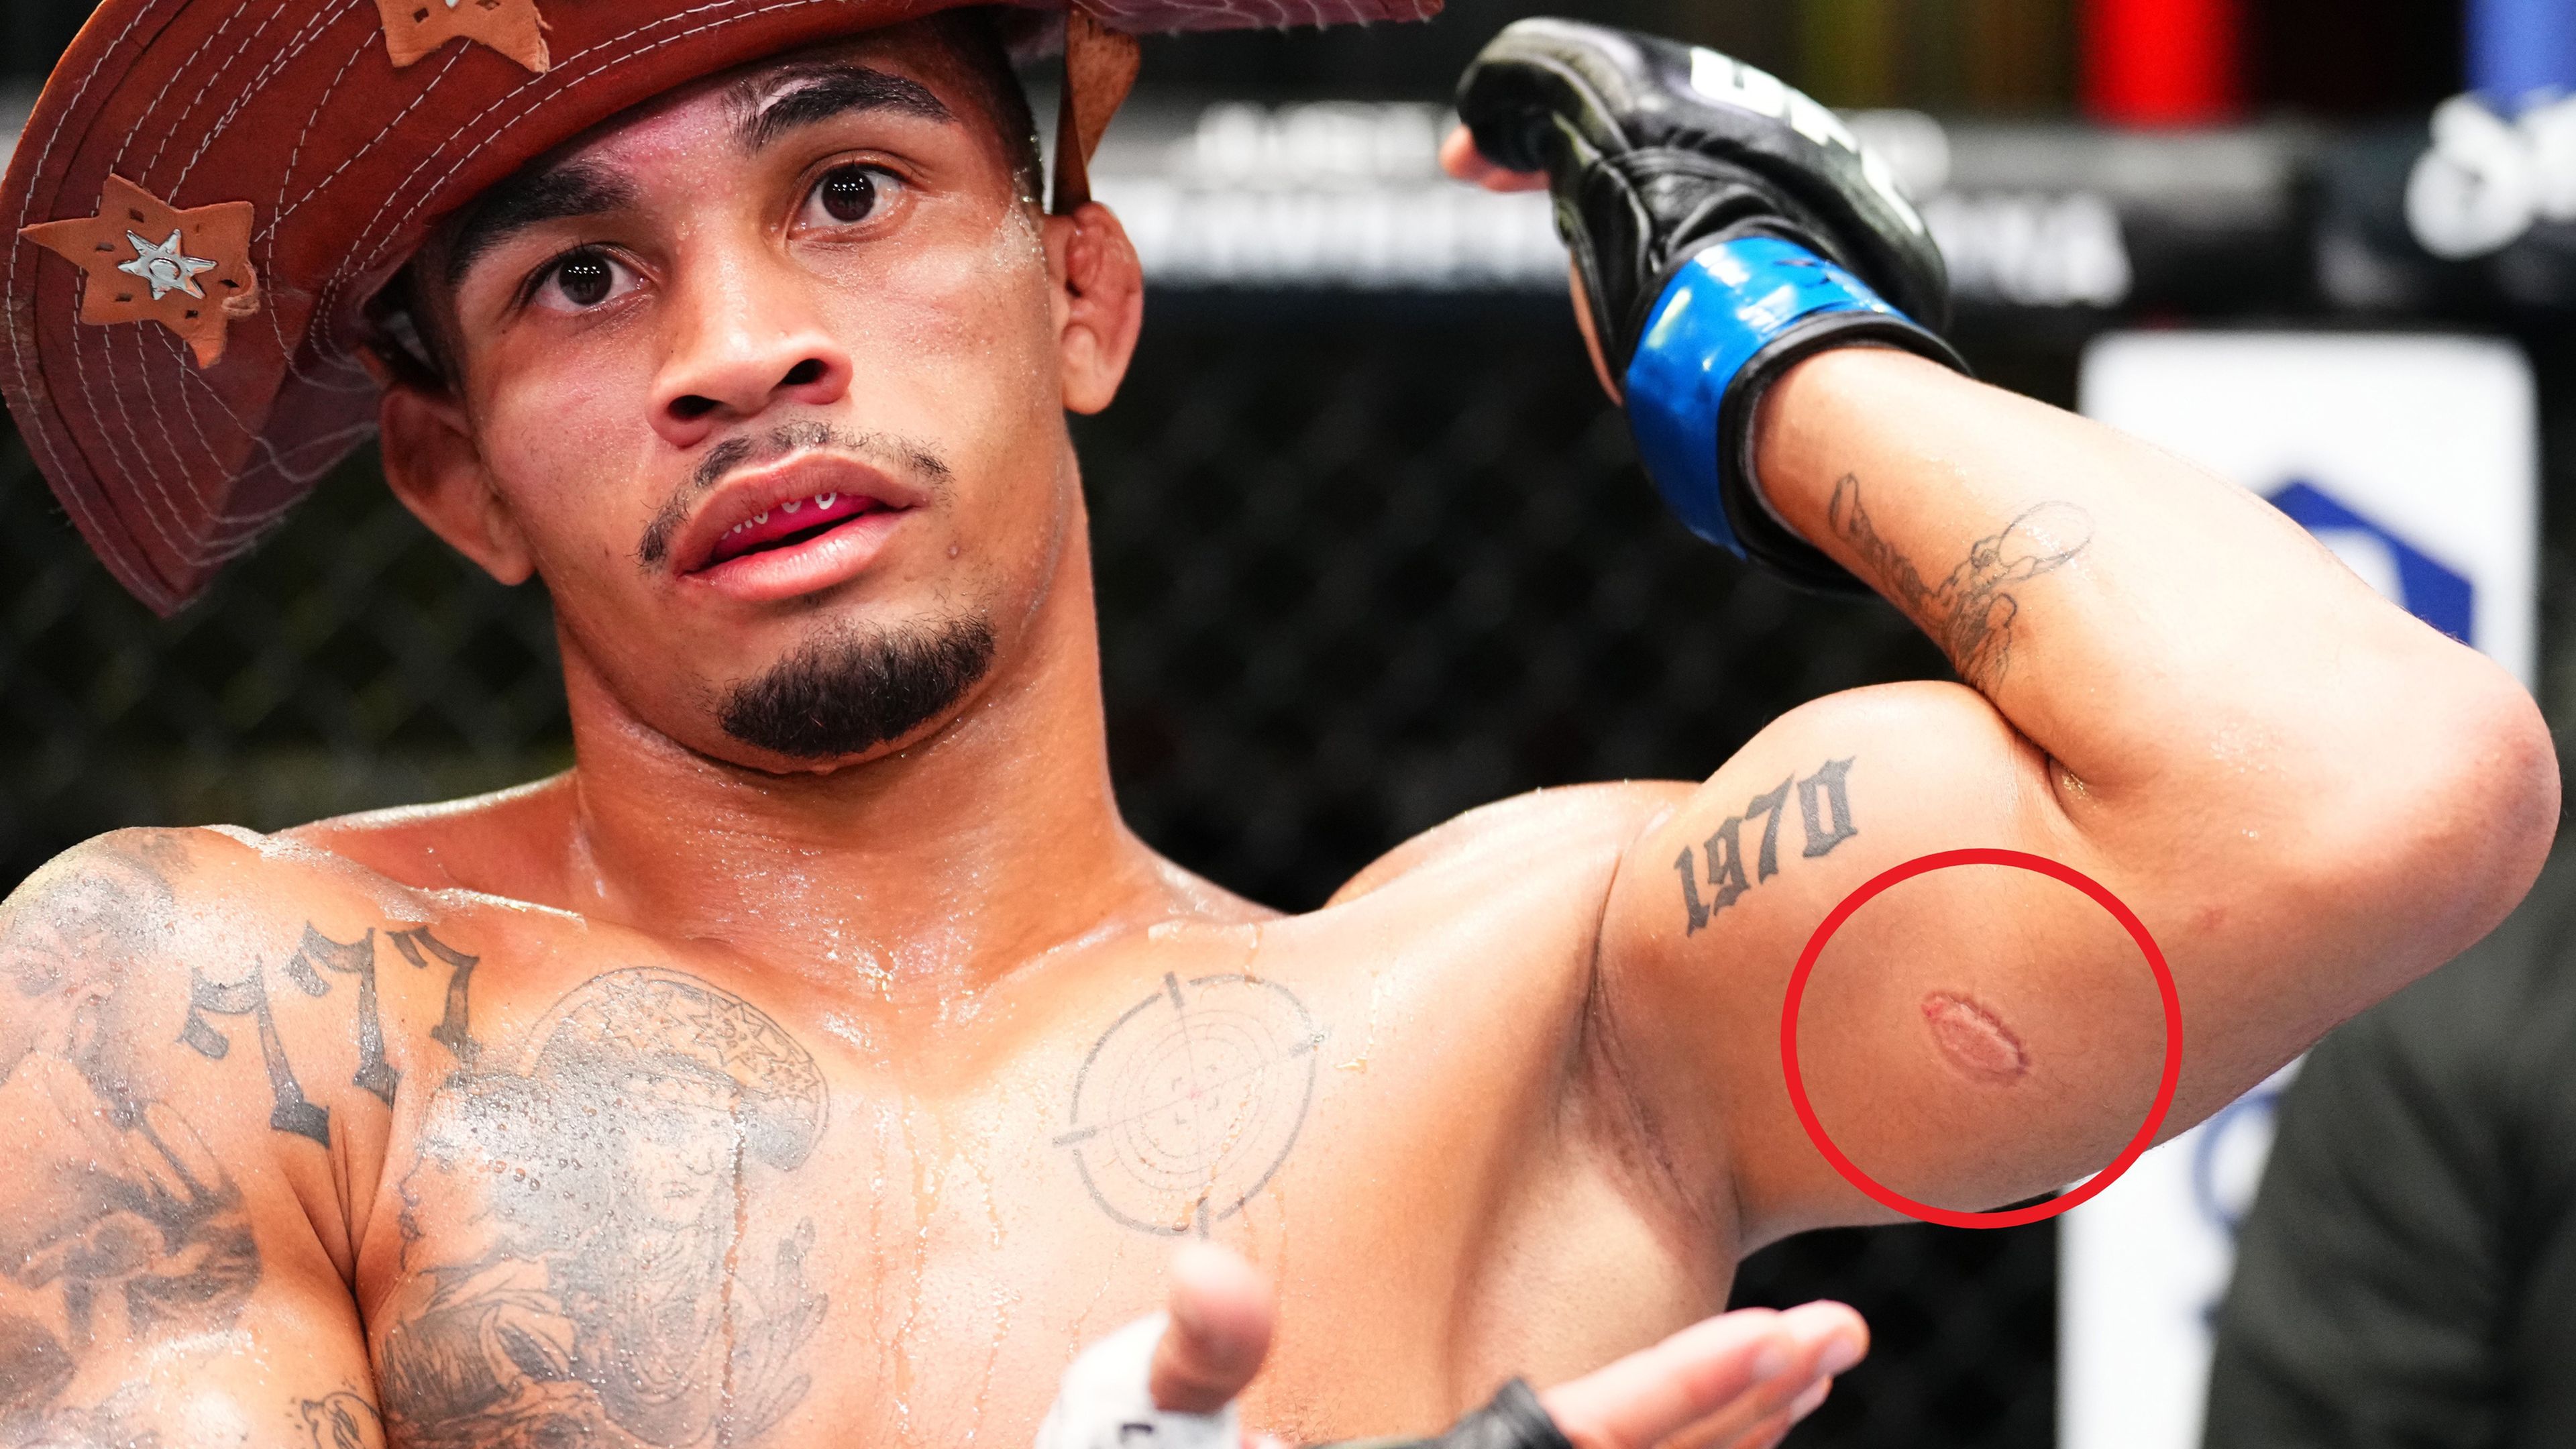 'Cut this weirdo': UFC fighter Igor Severino set to be axed following 'nasty' biting incident